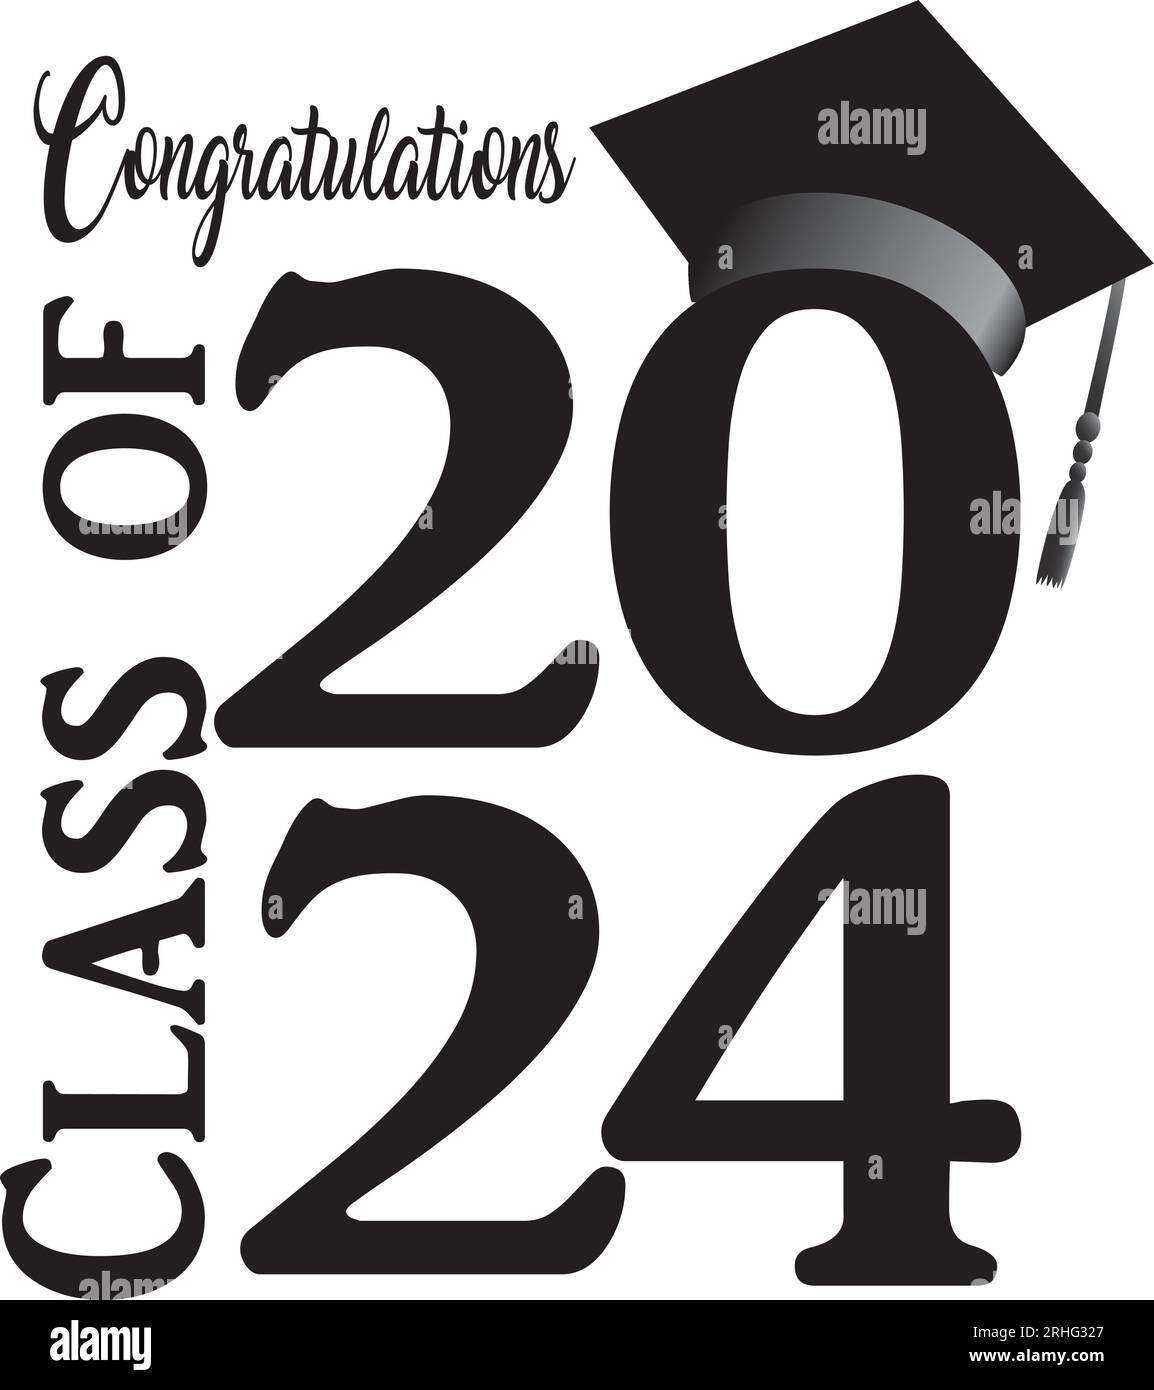 Class Of 2024 Word Lettering Script Banner Congrats Graduation Lettering  With Academic Cap Template For Design Party High School Or College Graduate  Invitations Stock Illustration - Download Image Now - iStock